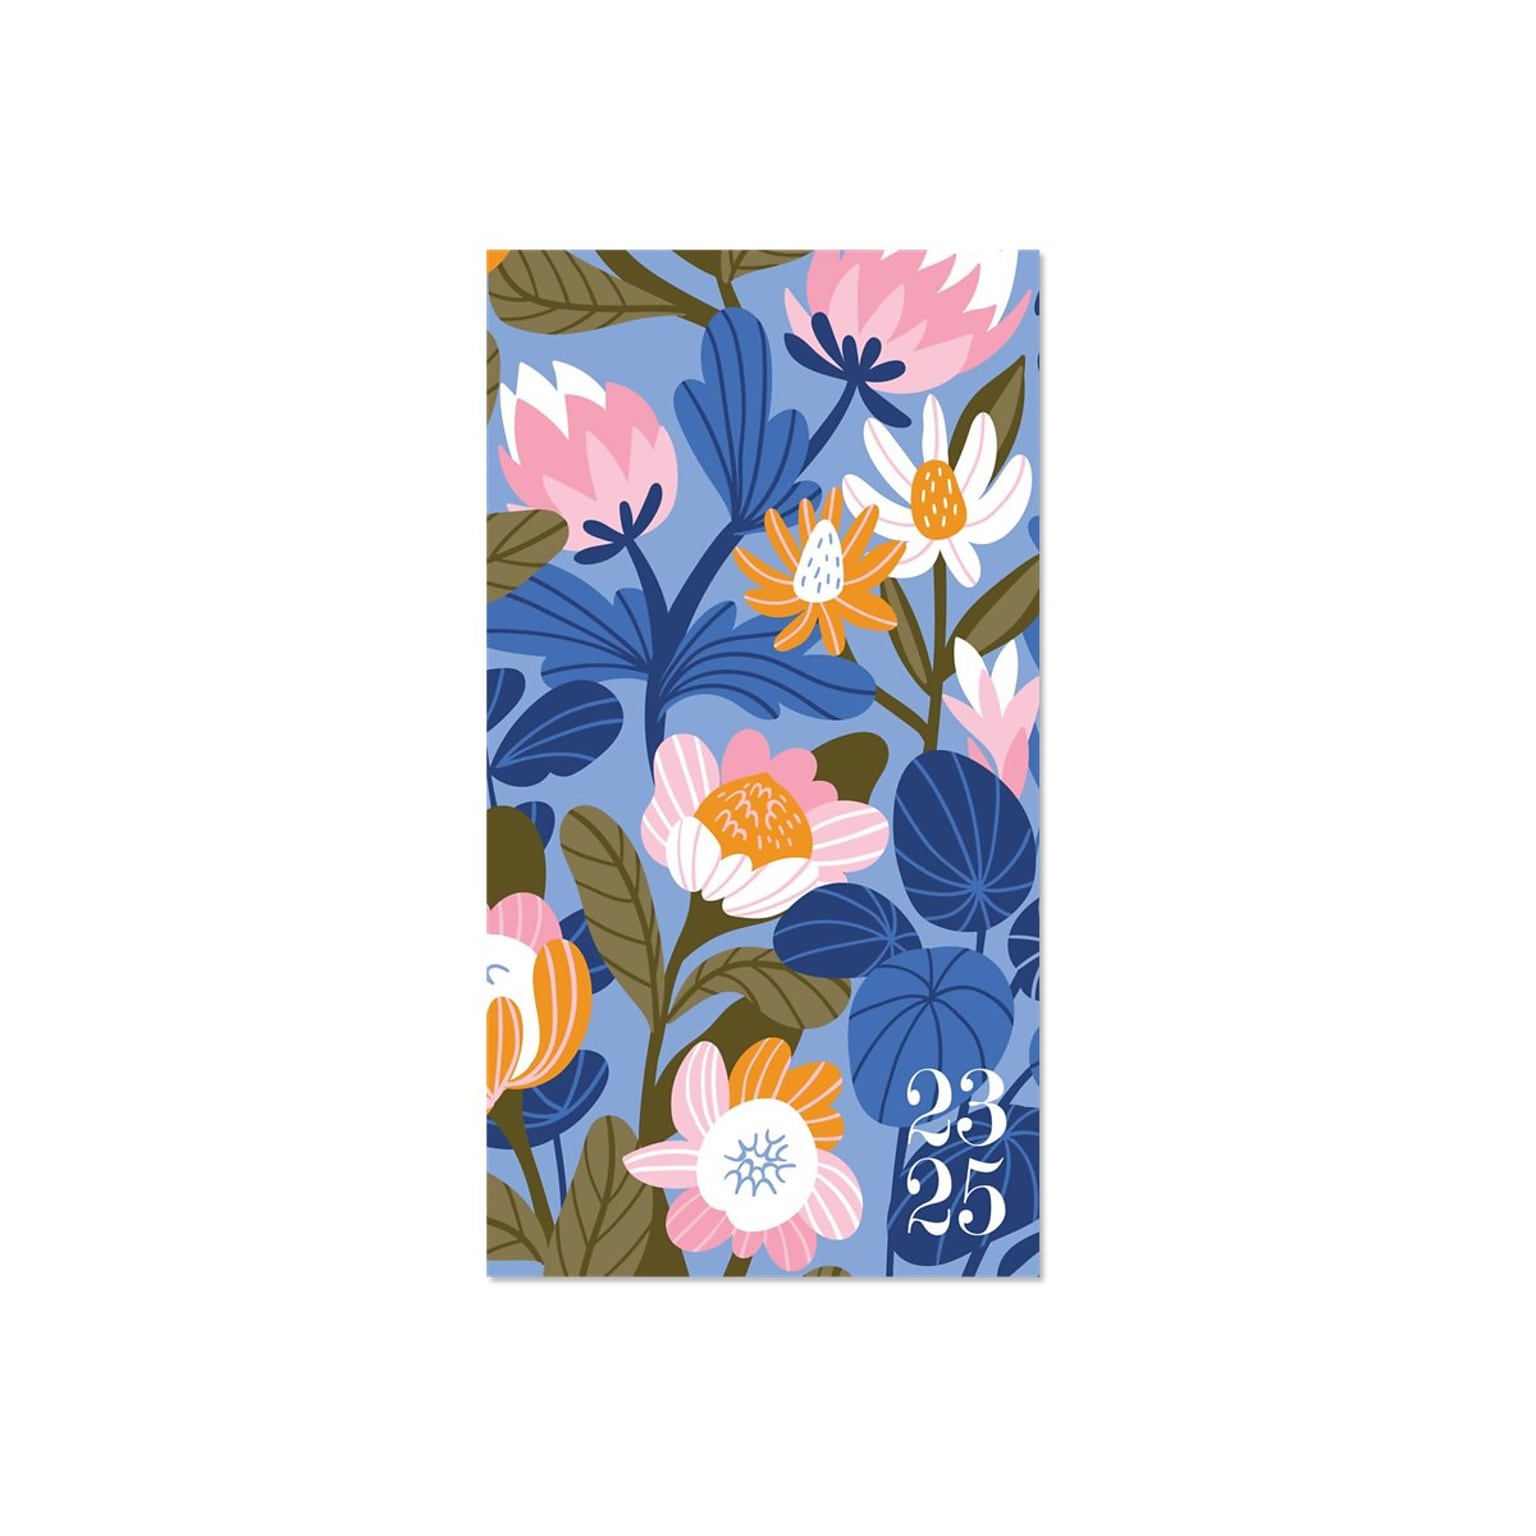 2023-2025 Willow Creek Blue Bloom 3.5 x 6.5 Academic Monthly Planner, Paperboard Cover, Multicolor (37973)